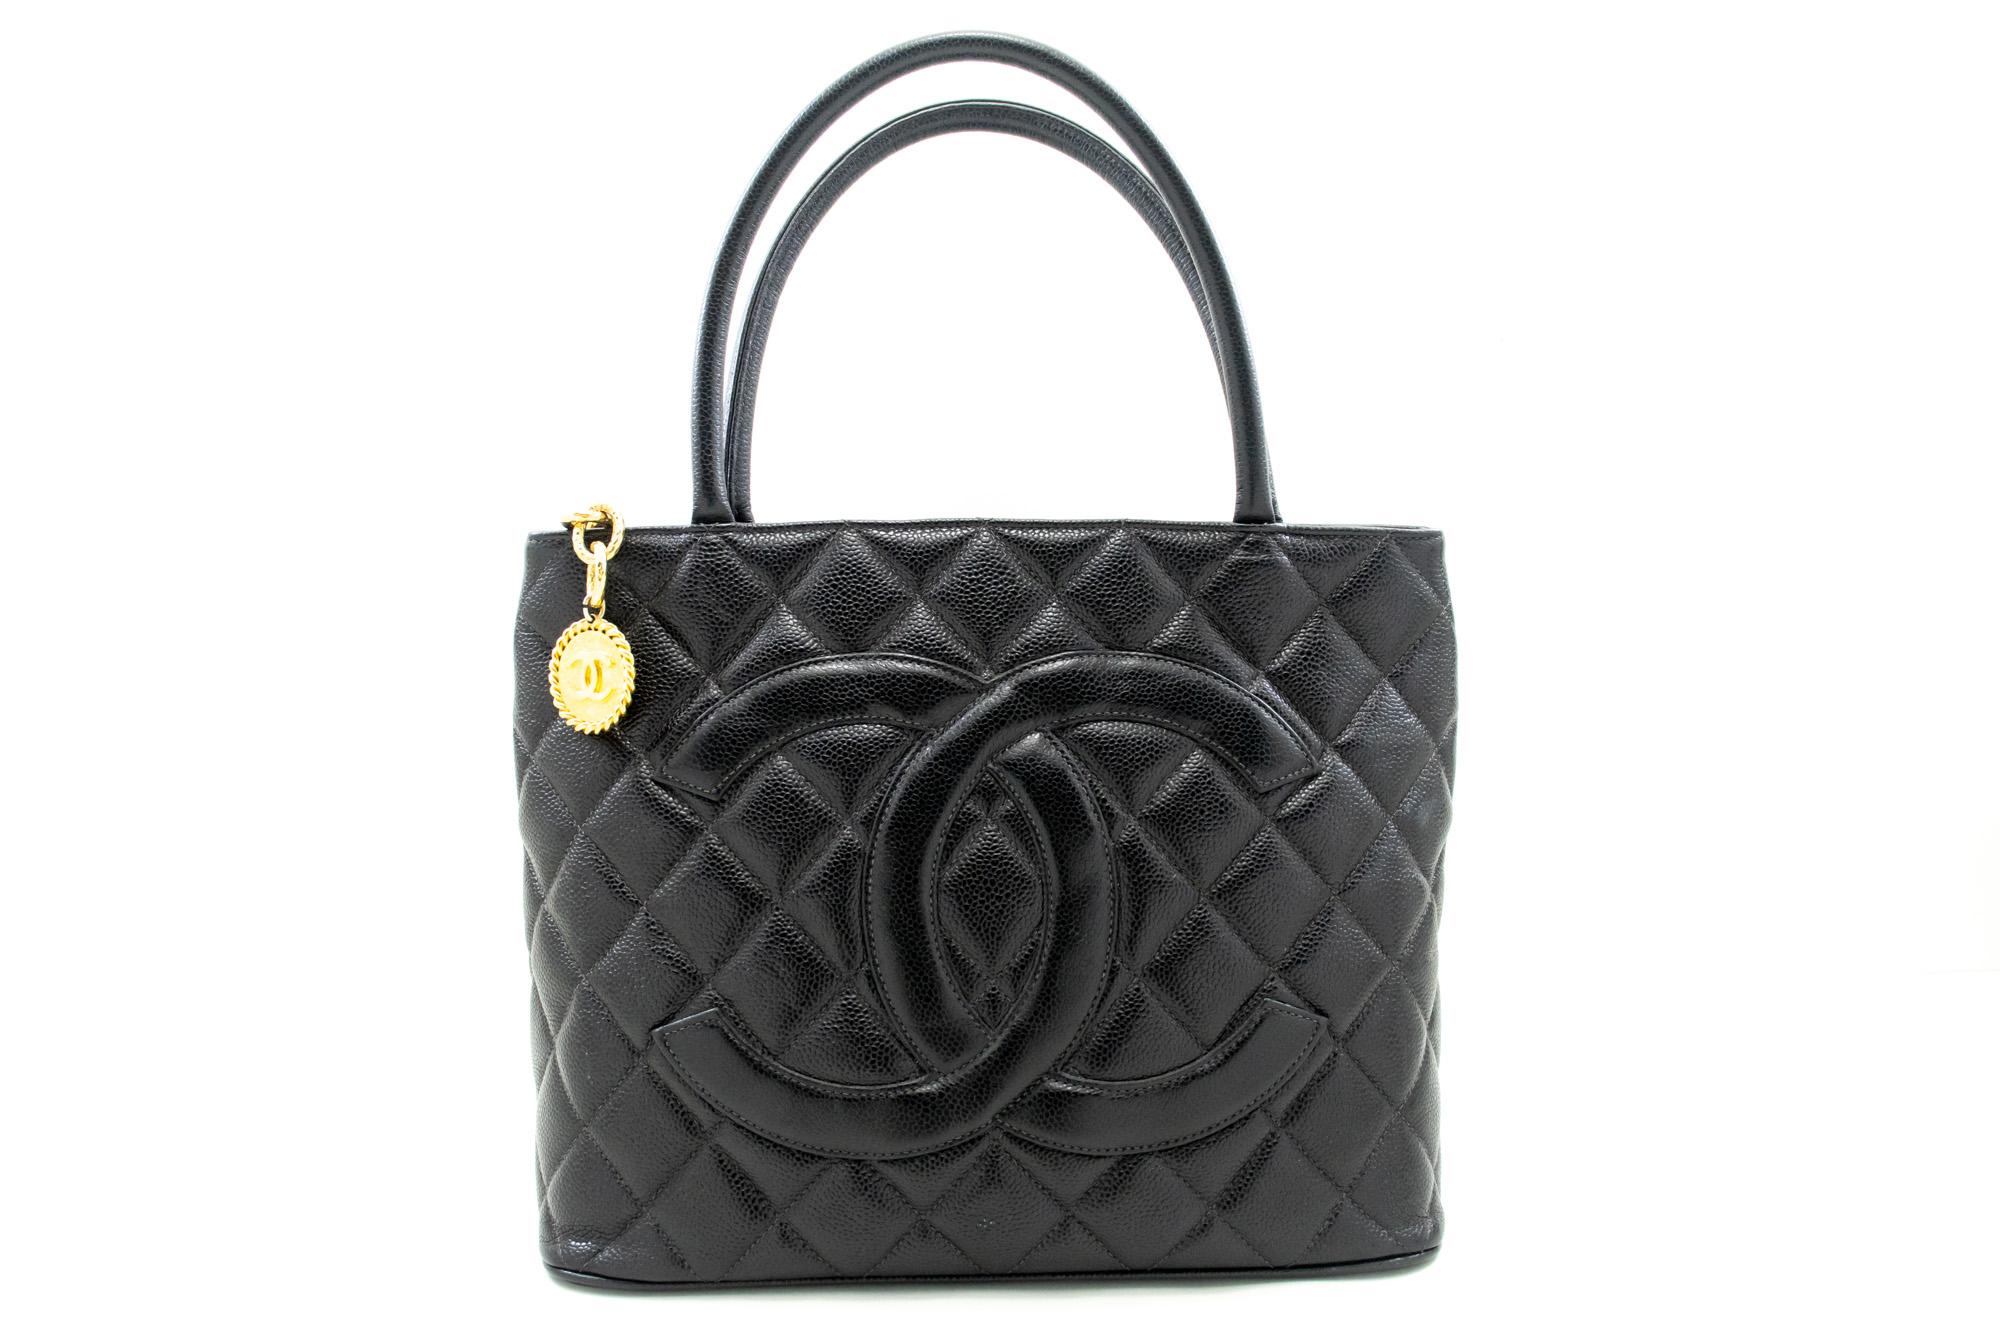 An authentic CHANEL Gold Medallion Caviar Shoulder Bag Grand Shopping Tote. The color is Black. The outside material is Leather. The pattern is Solid. This item is Vintage / Classic. The year of manufacture would be 1997-1999.
Conditions &